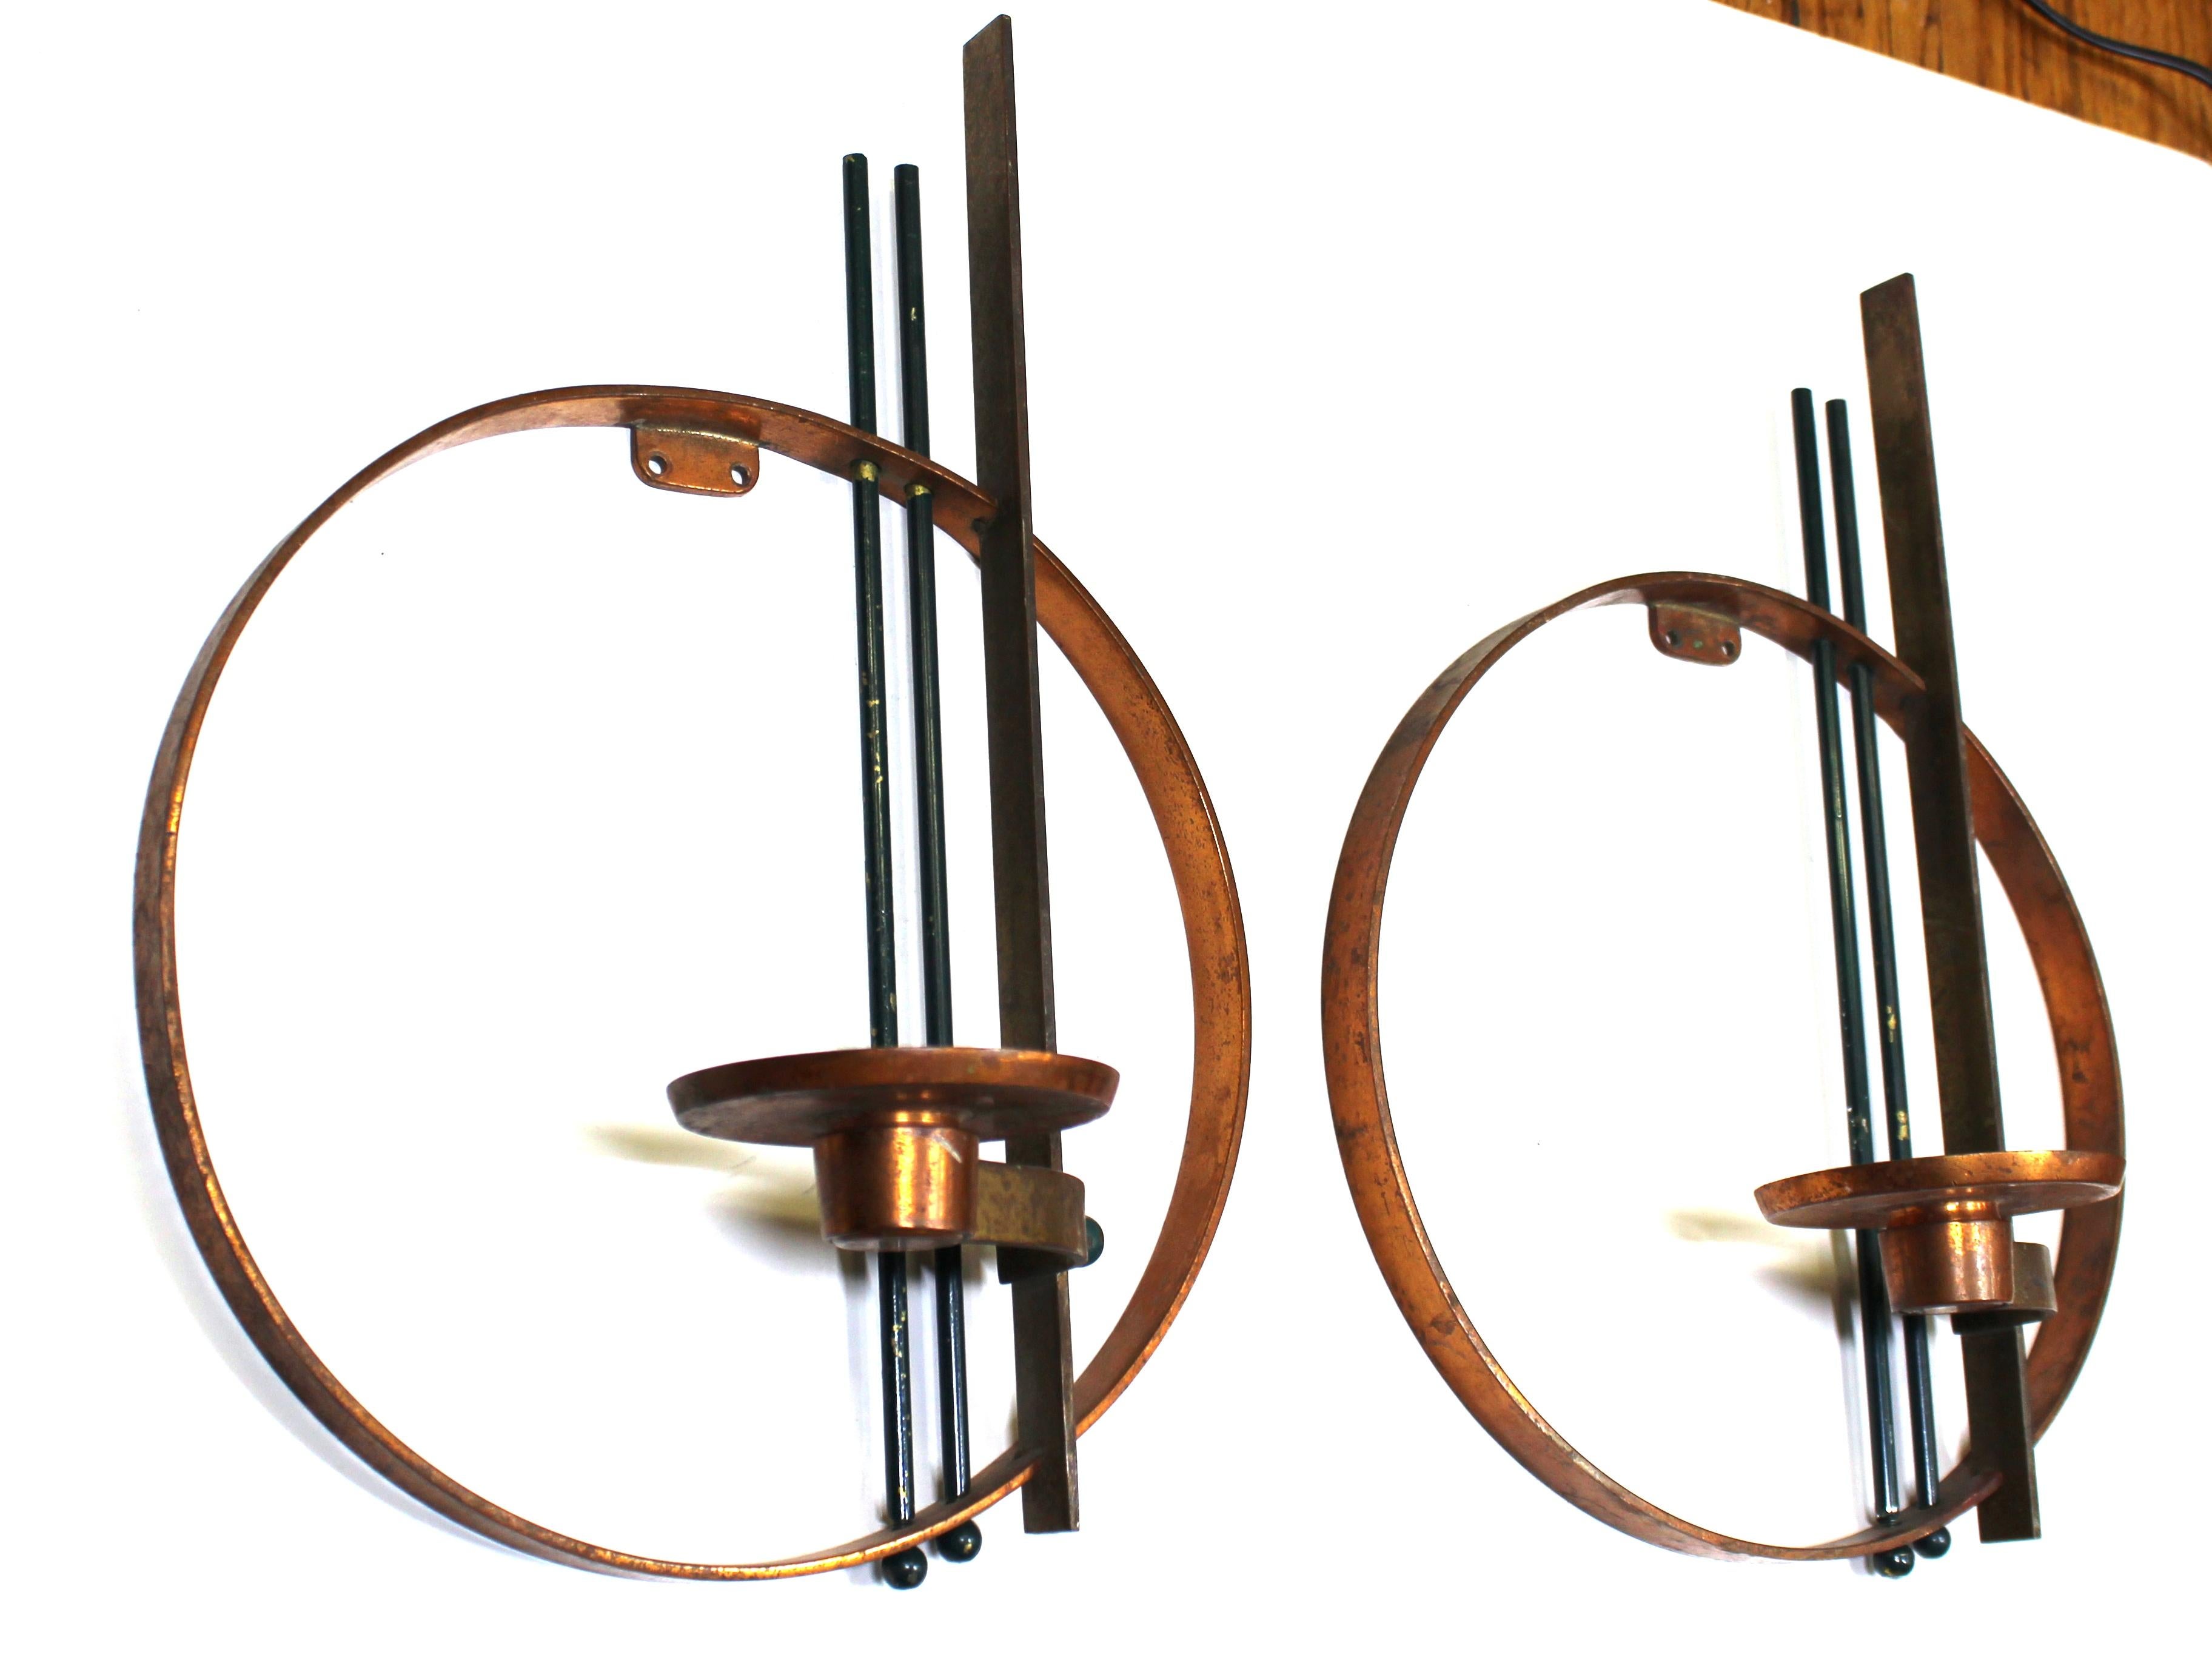 American Art Deco modernist pair of wall candle sconces in copper, enamel and brass, designed by Walter Von Nessen for Chase. The pair is in unused condition and was made during the mid-1930s in the United States. Chase makers mark on the back of